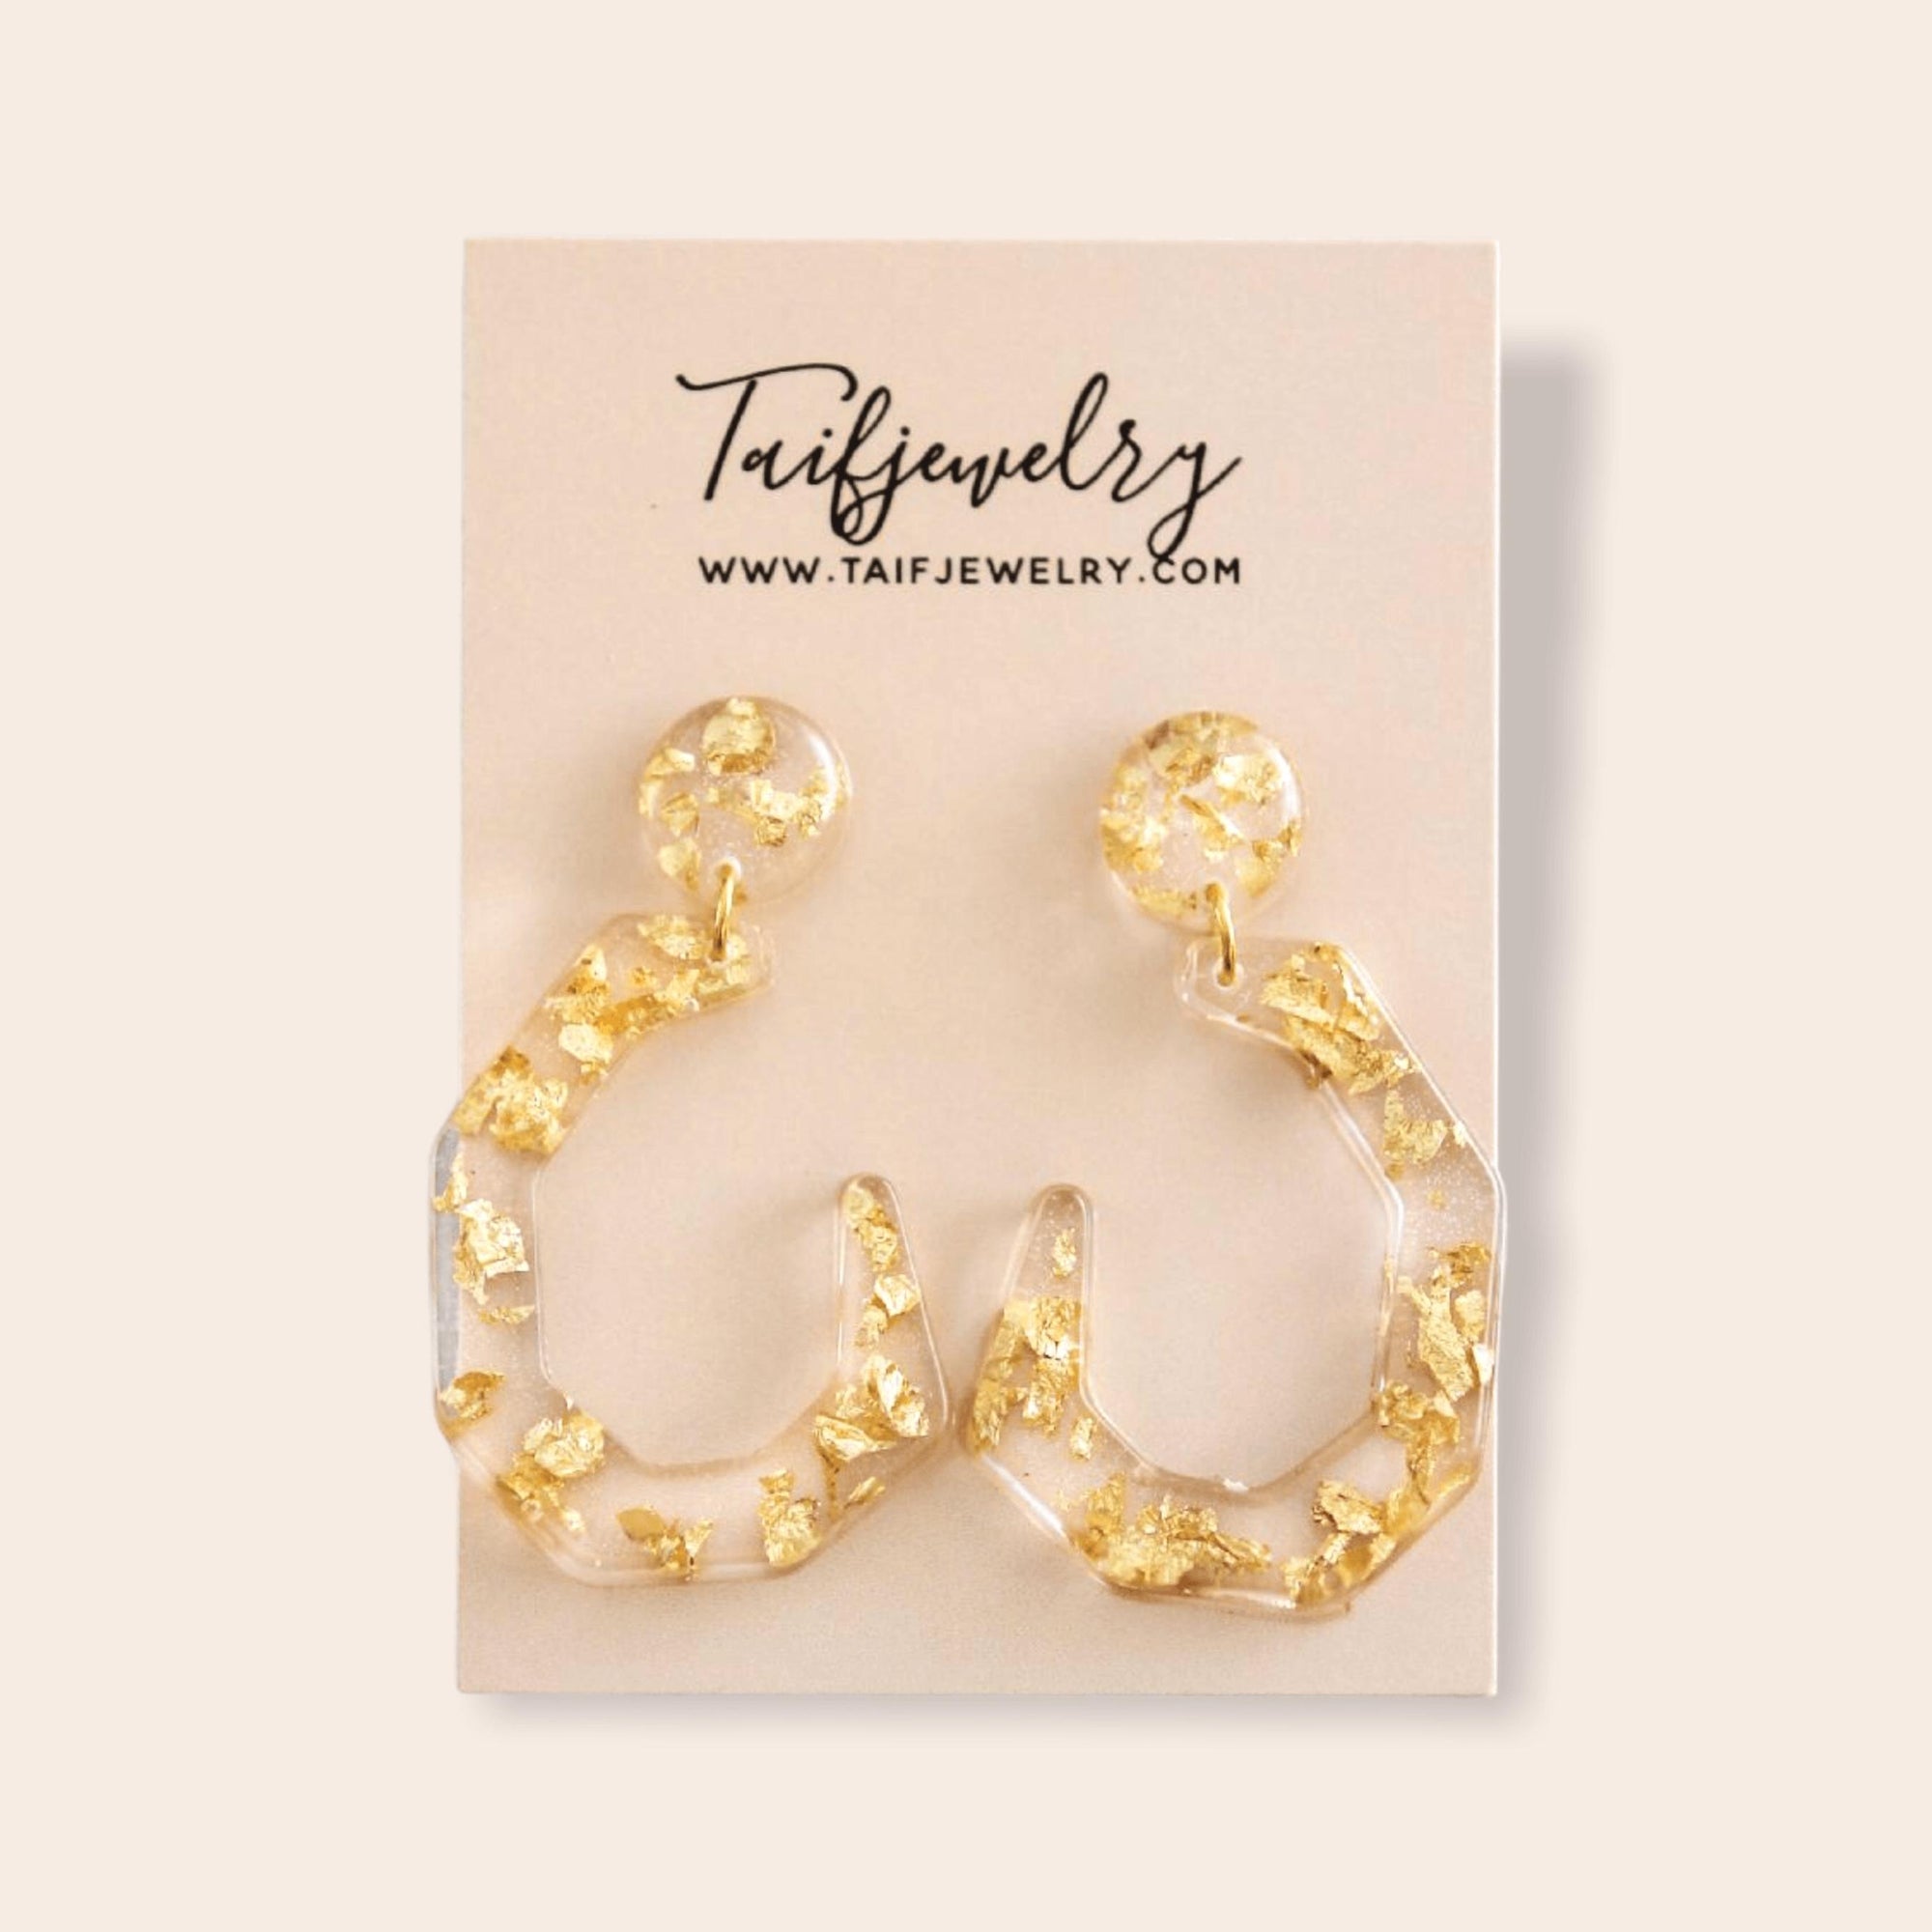 THE CLEAR GOLD-FLAKE RESIN EARRINGS .